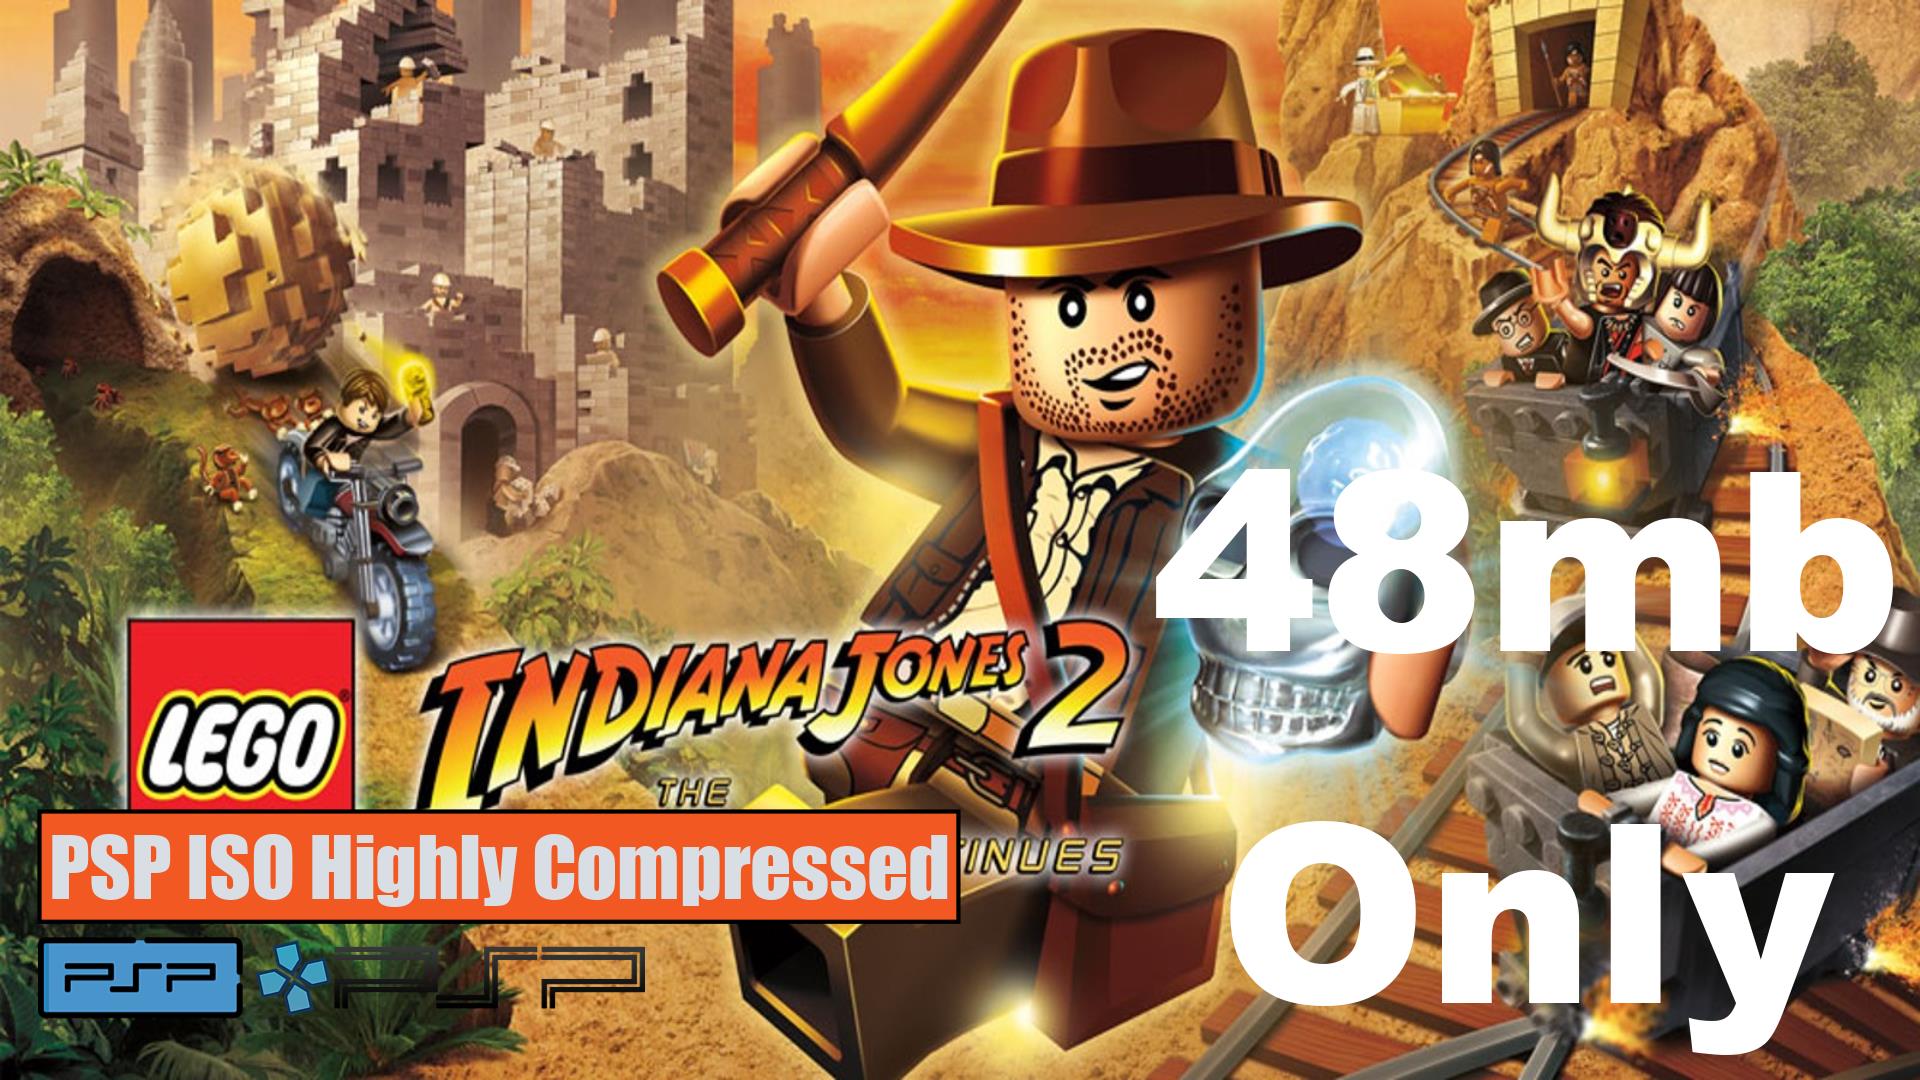 Lego Indiana Jones 2 The Adventure Continues PSP ISO Highly Compressed